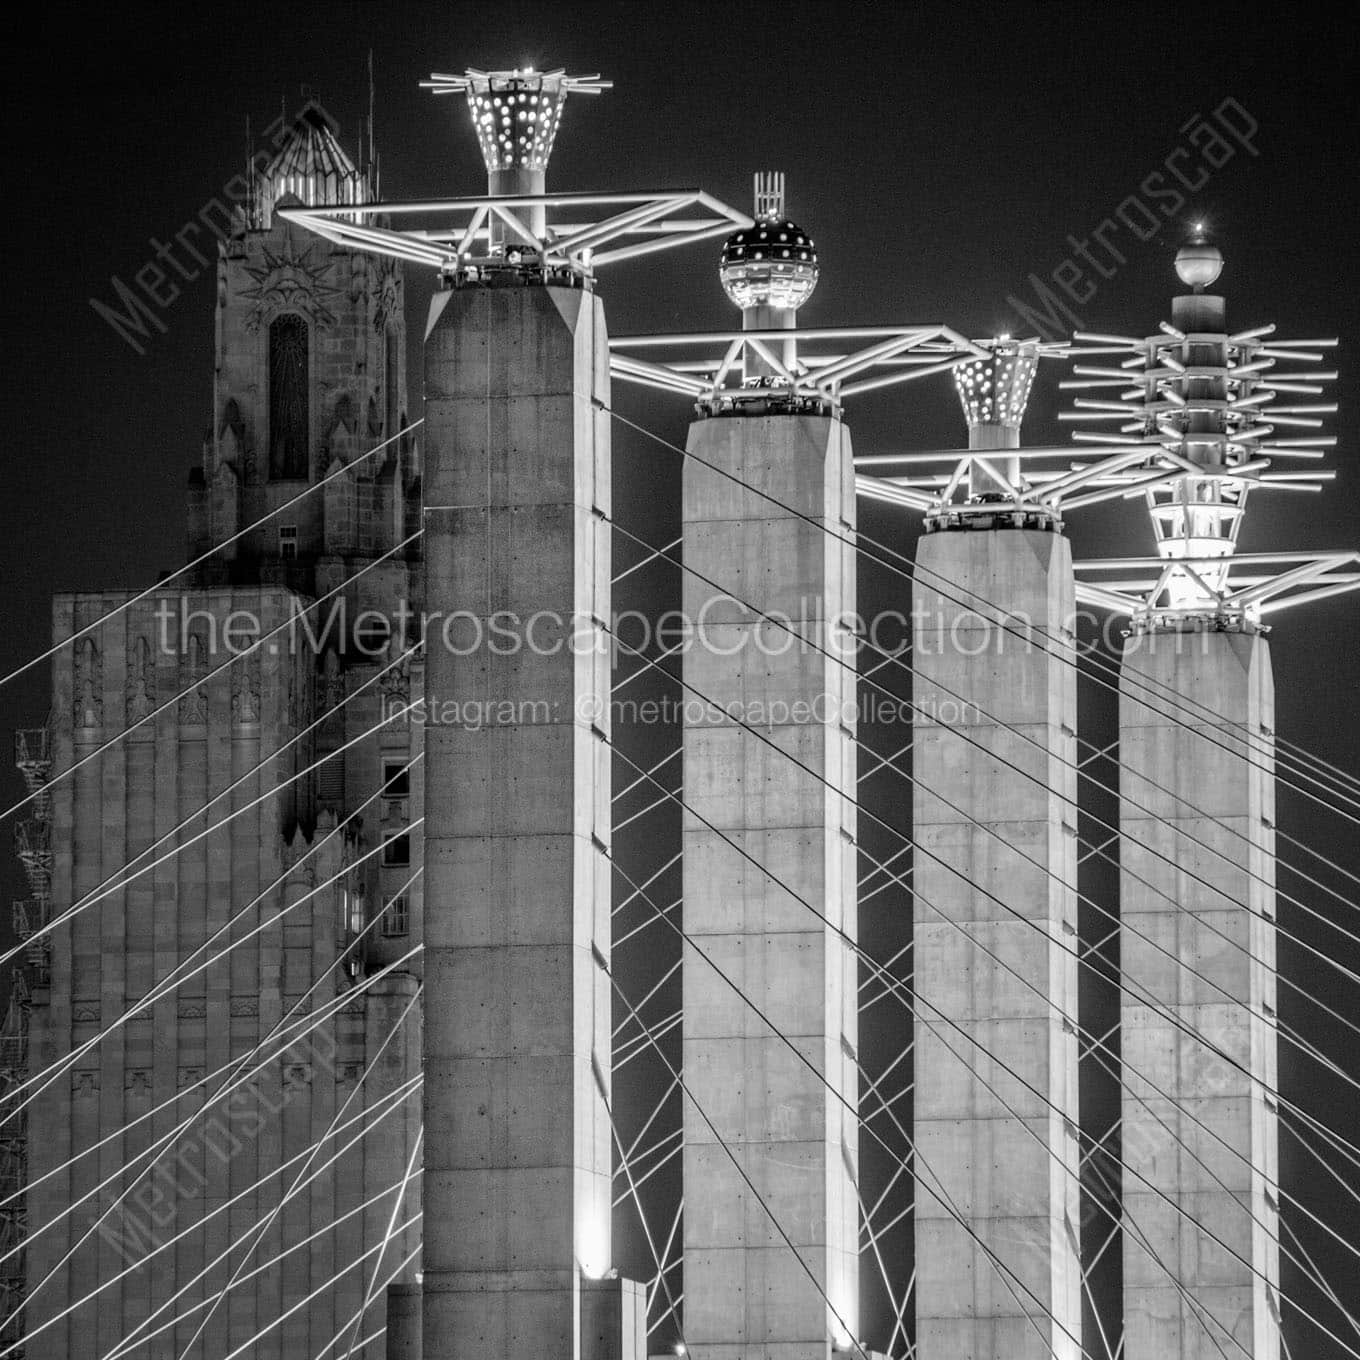 kcpl building bartle hall pylons Black & White Office Art